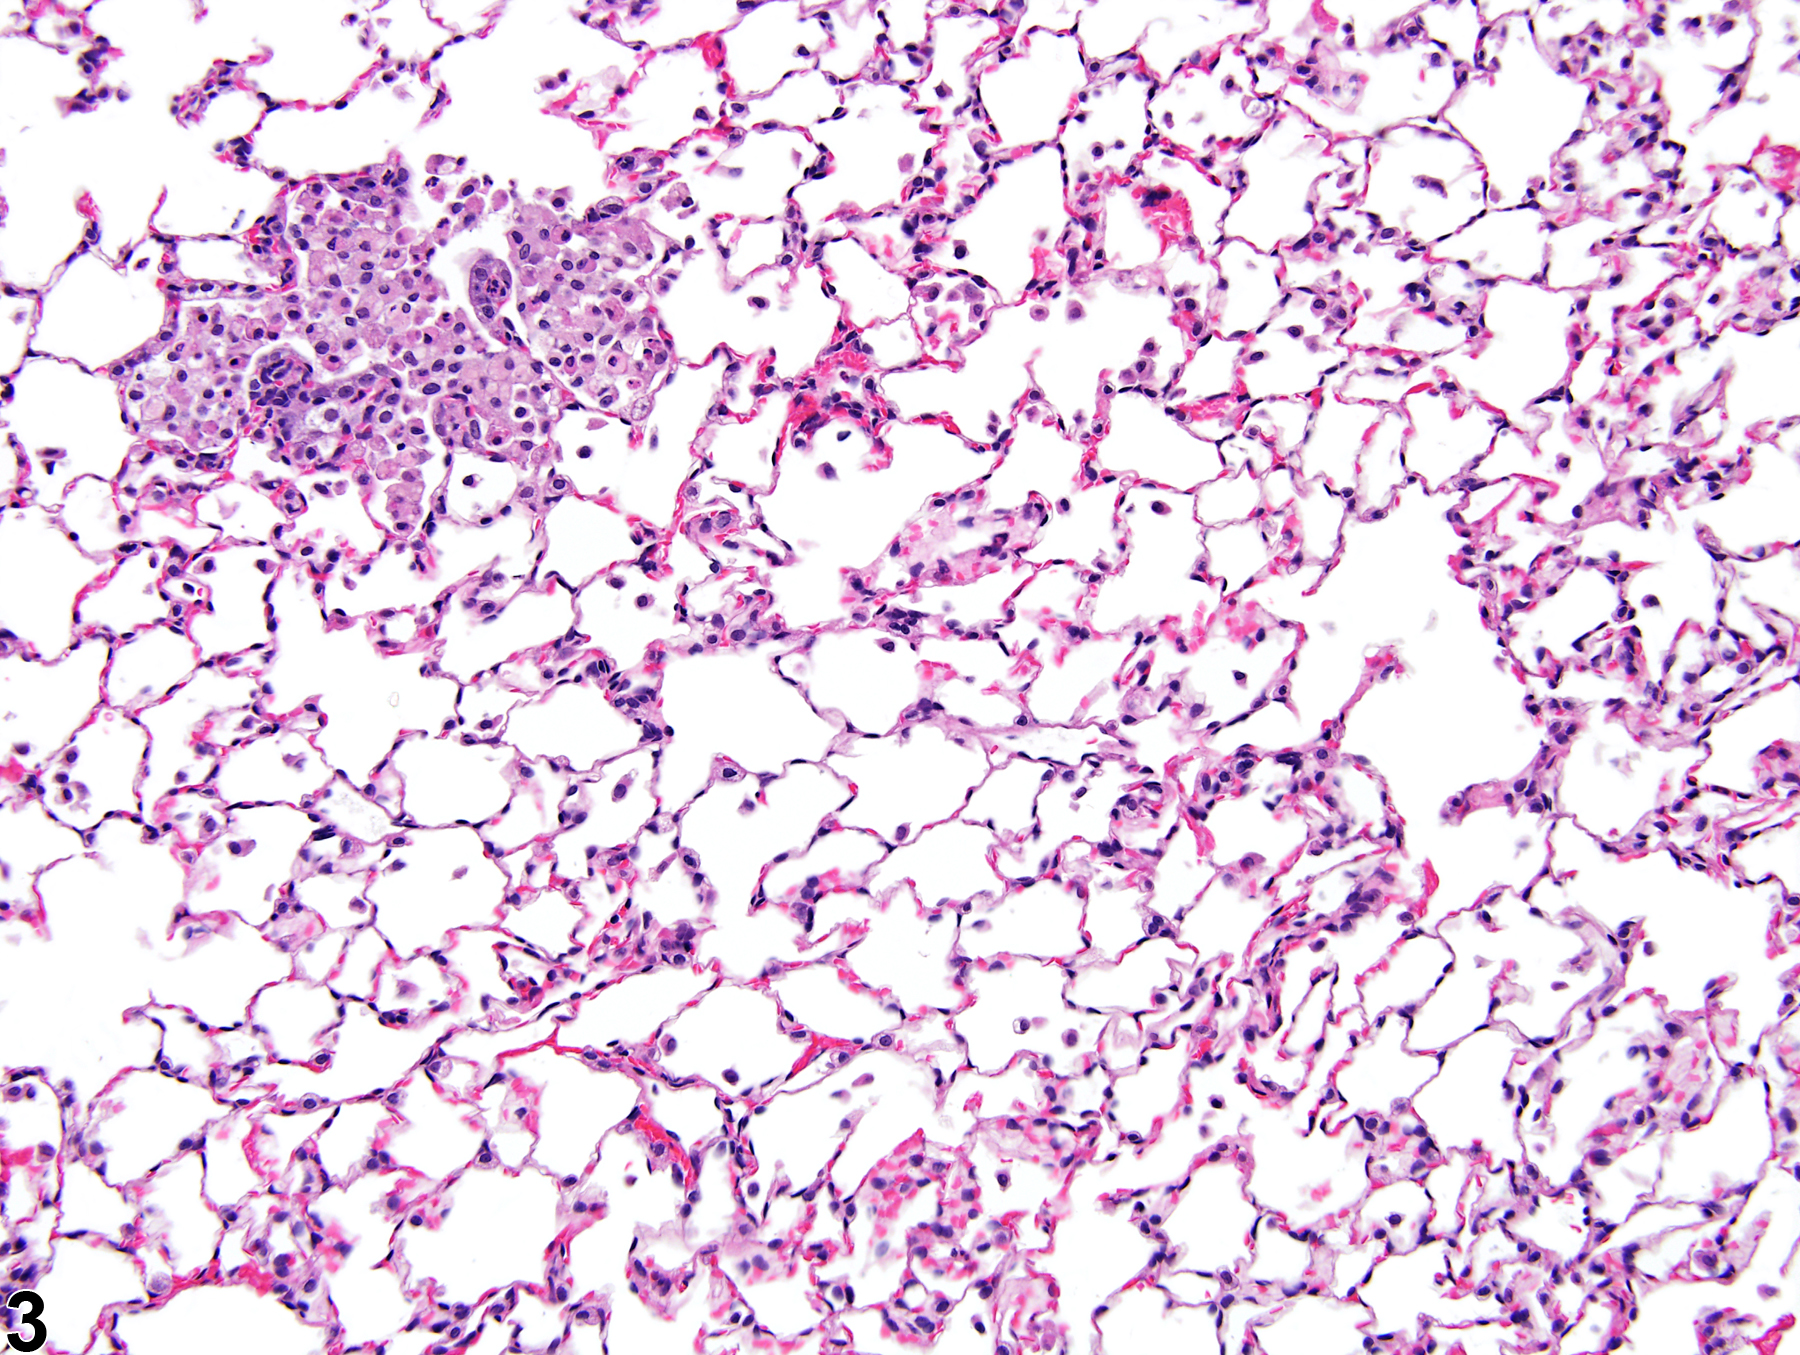 Image of infiltration cellular, histiocyte in the lung from a male F344/NTac rat in a subchronic study